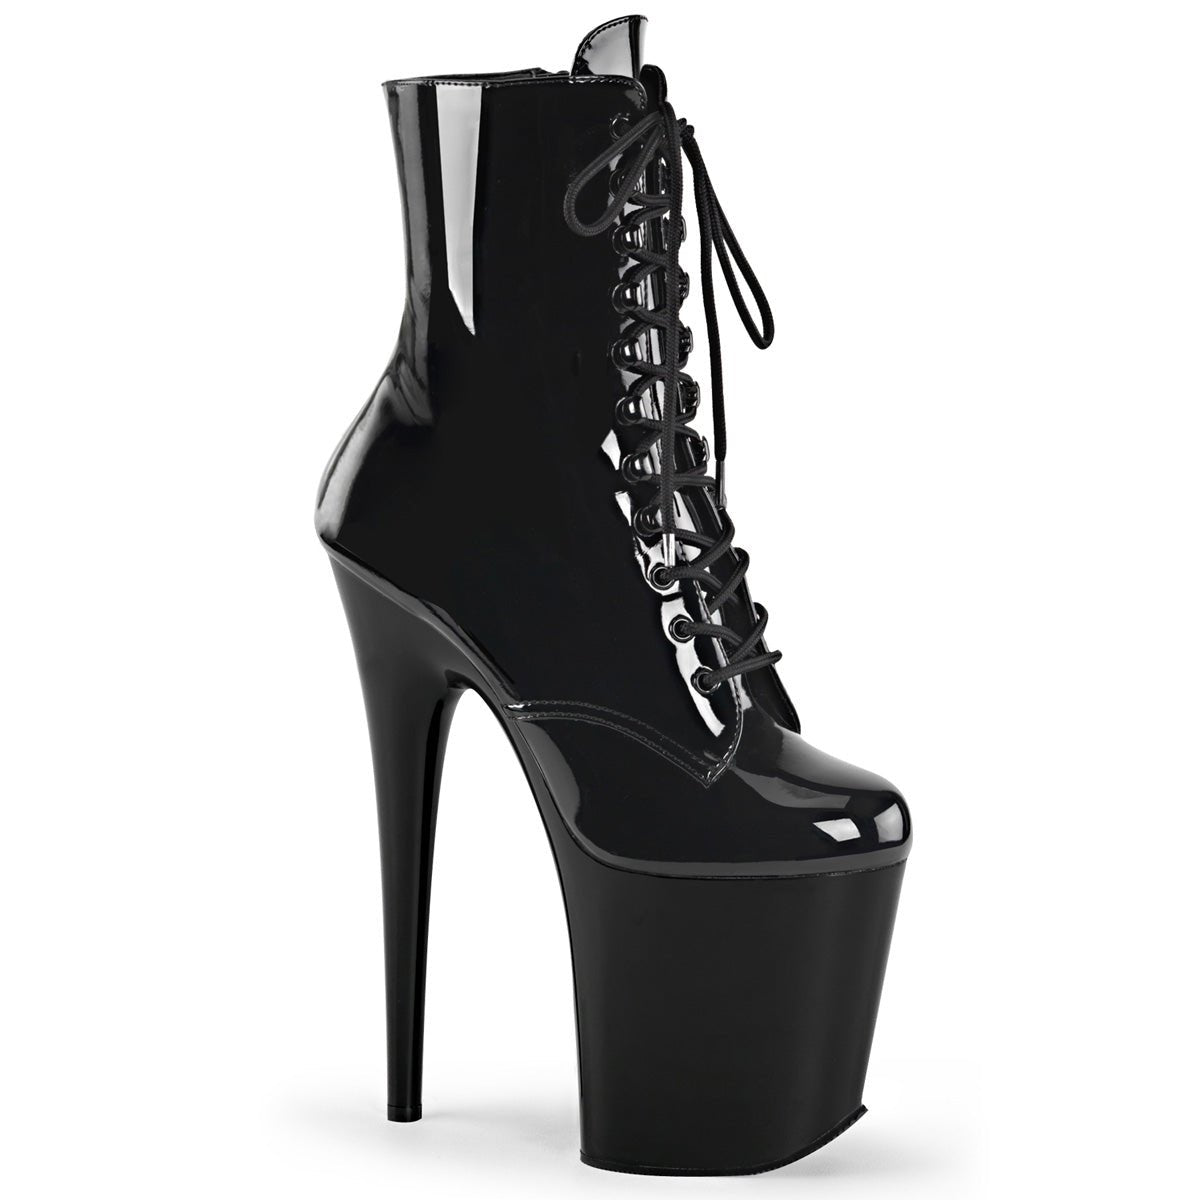 Pleaser FLAMINGO 1020-1 Platform Boots,Front Lace Boots - From Pleaser Sold By Alternative Footwear